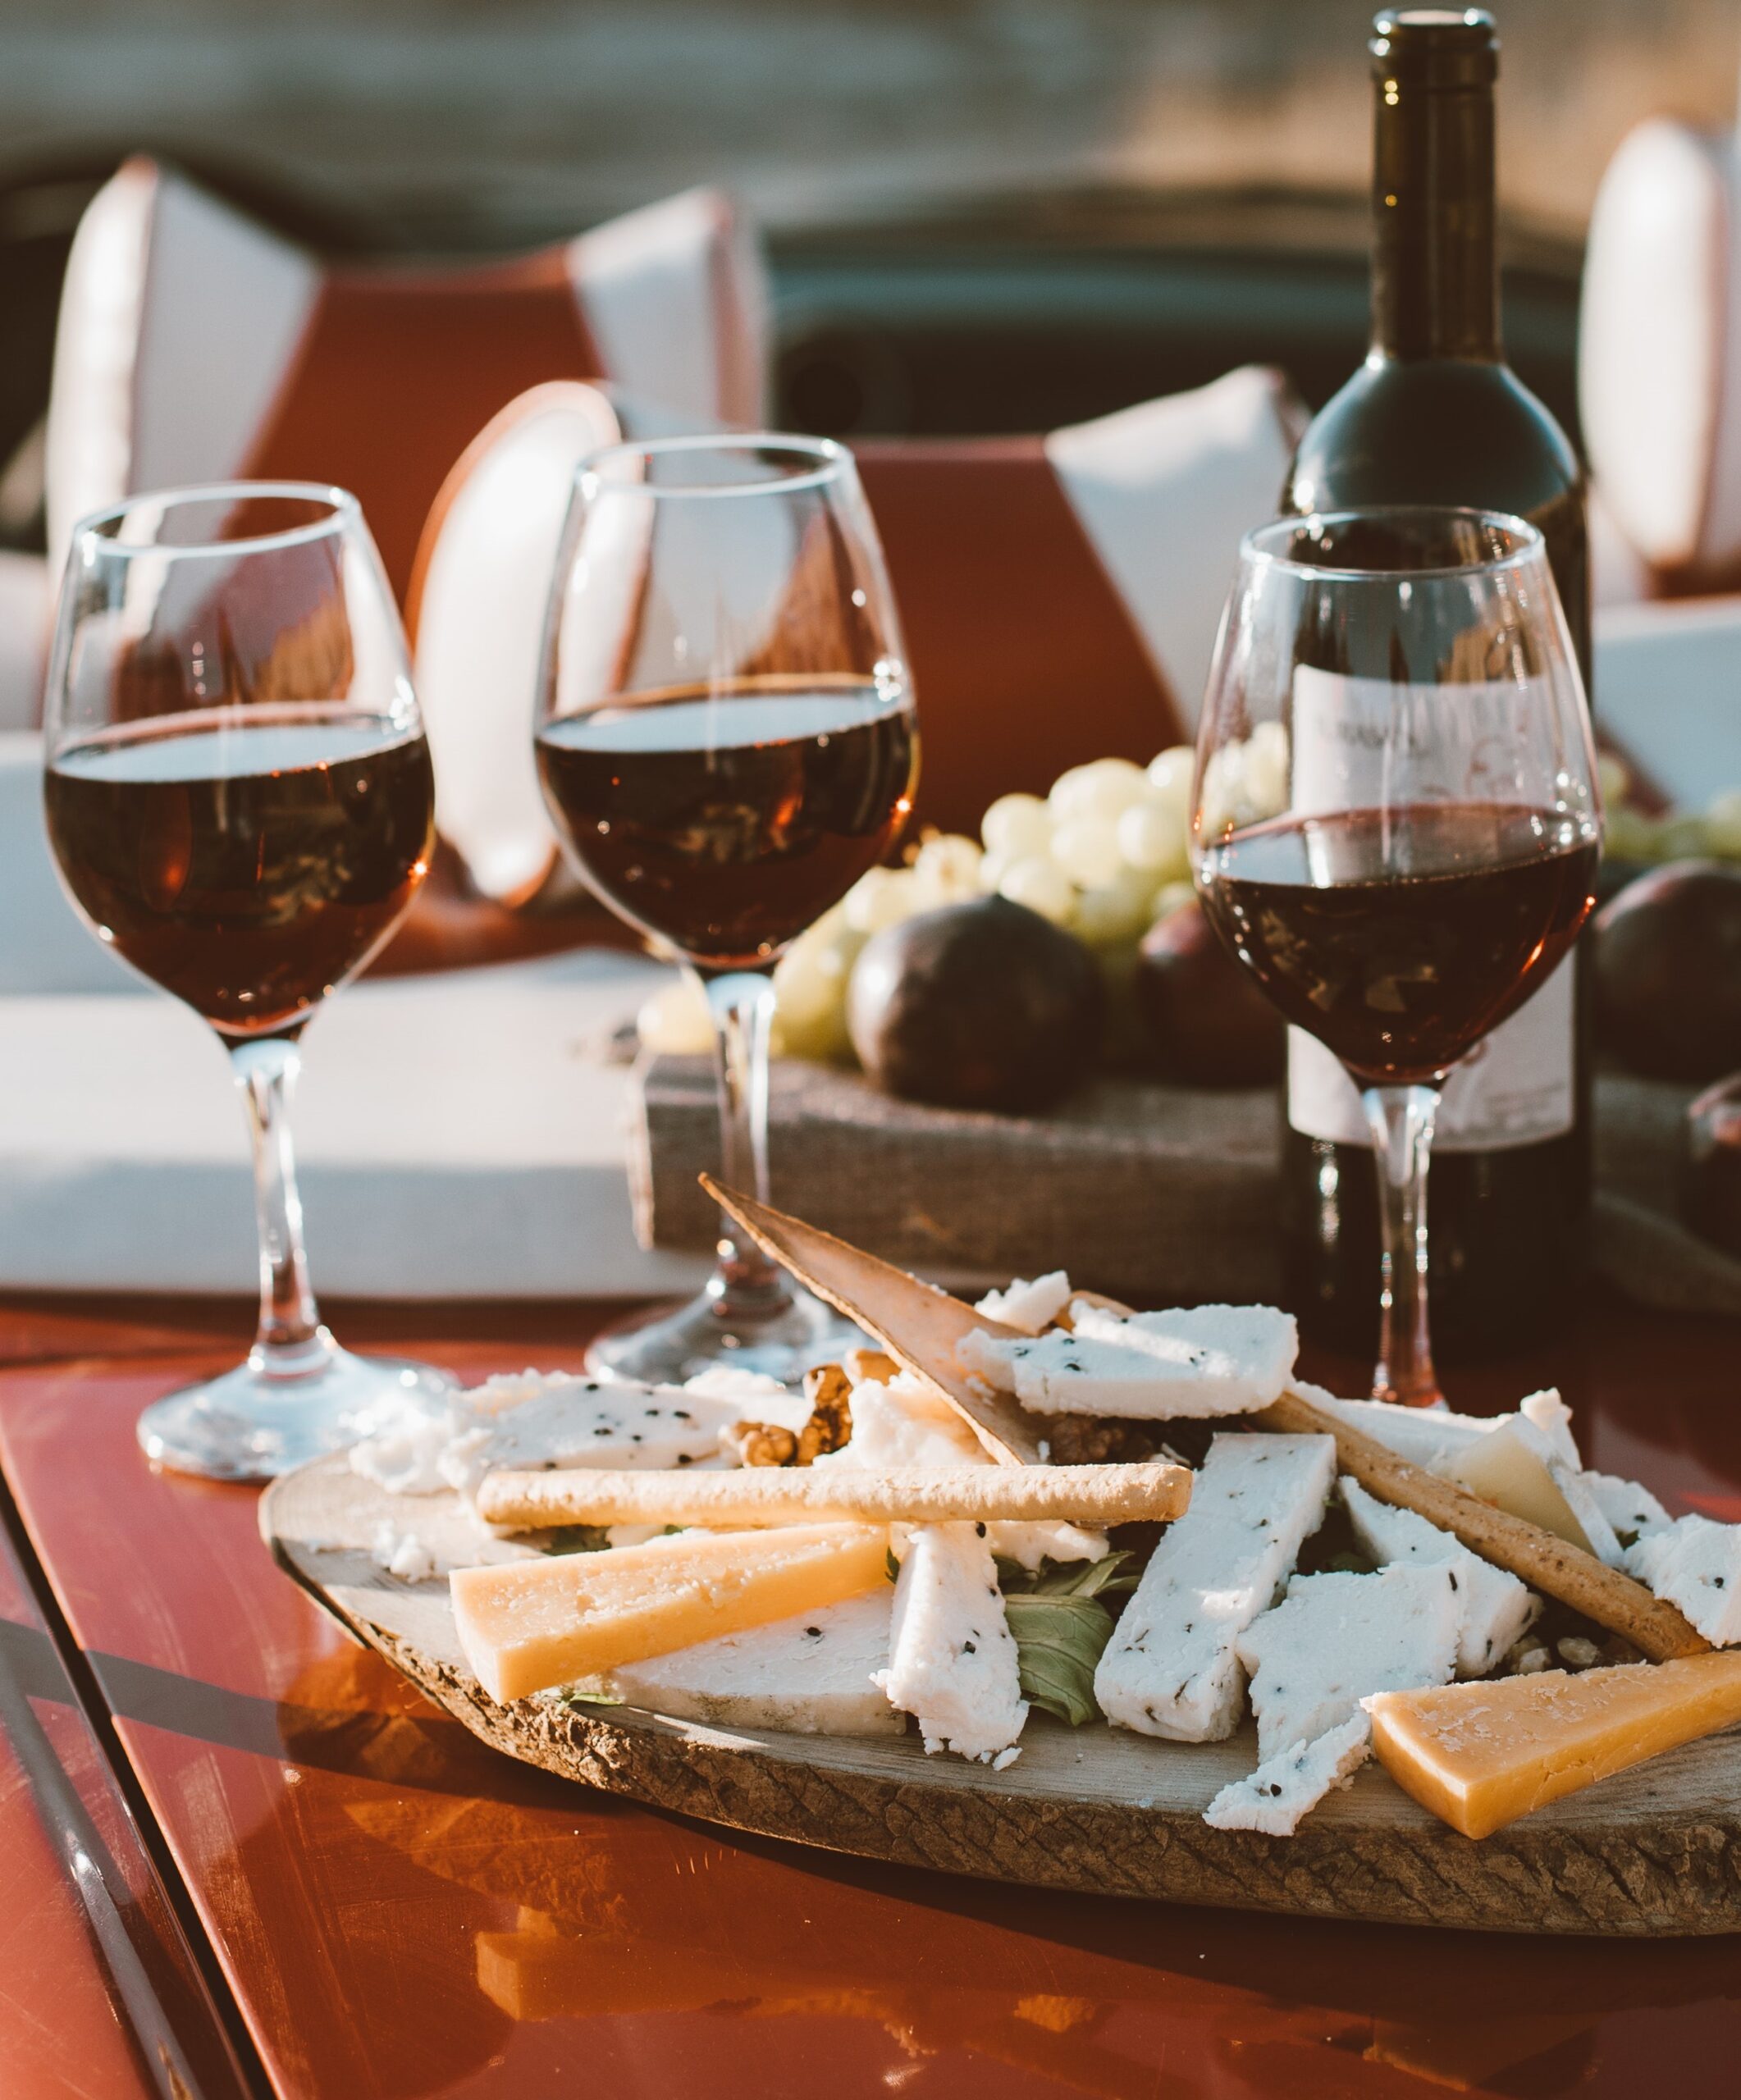 The Bucks County Wine Trail's Wine & Cheese Tasting Experience features samples to please every palate.